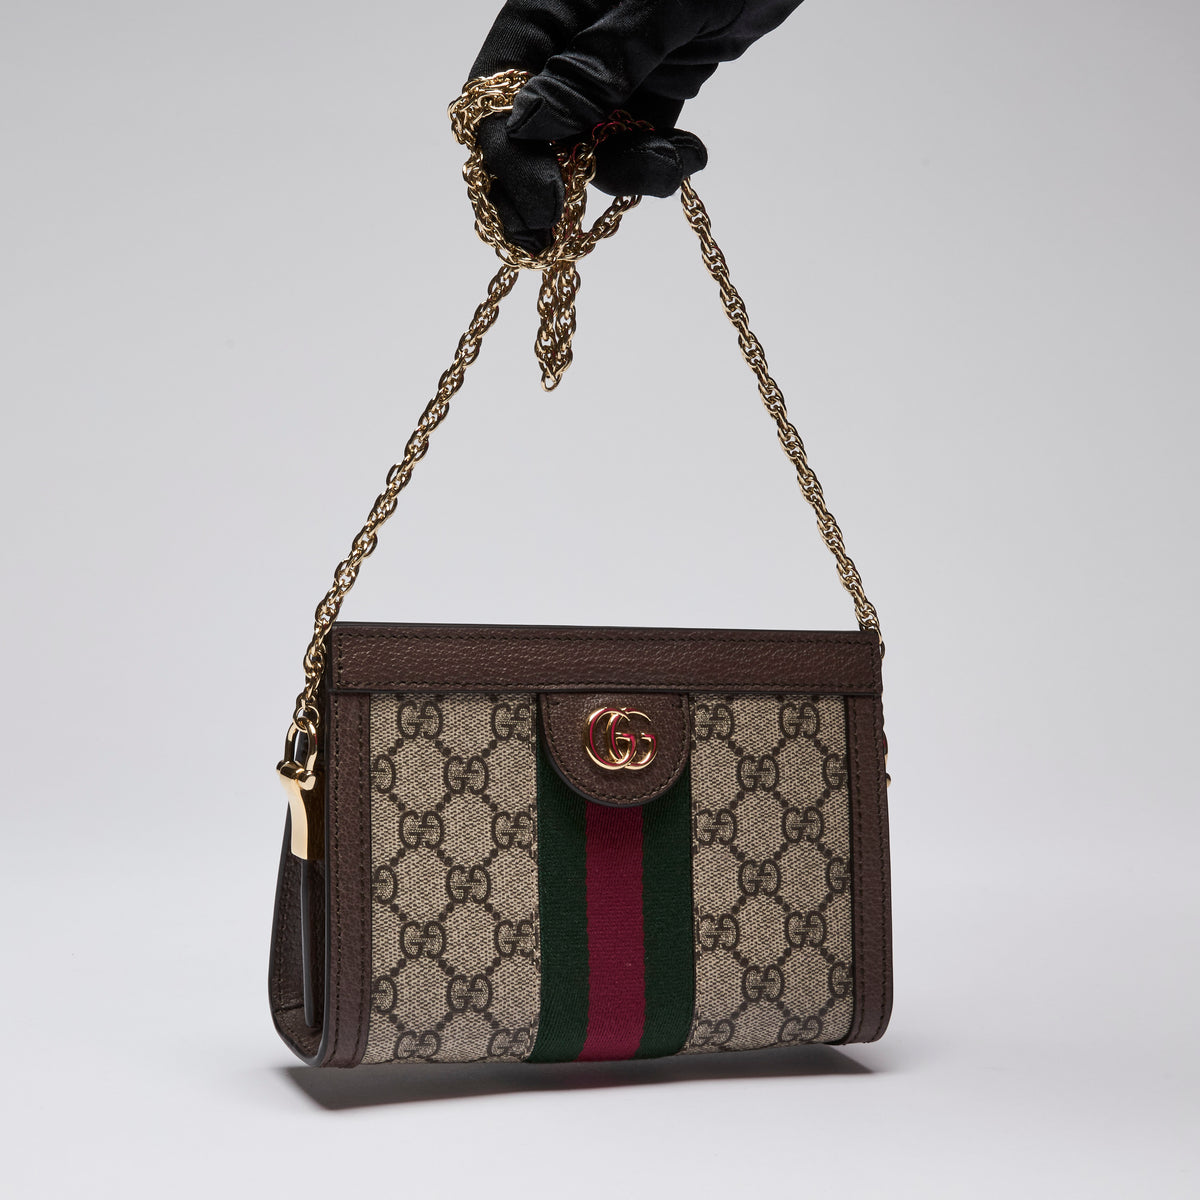  Excellent pre-Loved Stylish Gucci GG Supreme Monogram Mini Ophedia Chain Shoulder Bag  (Front)